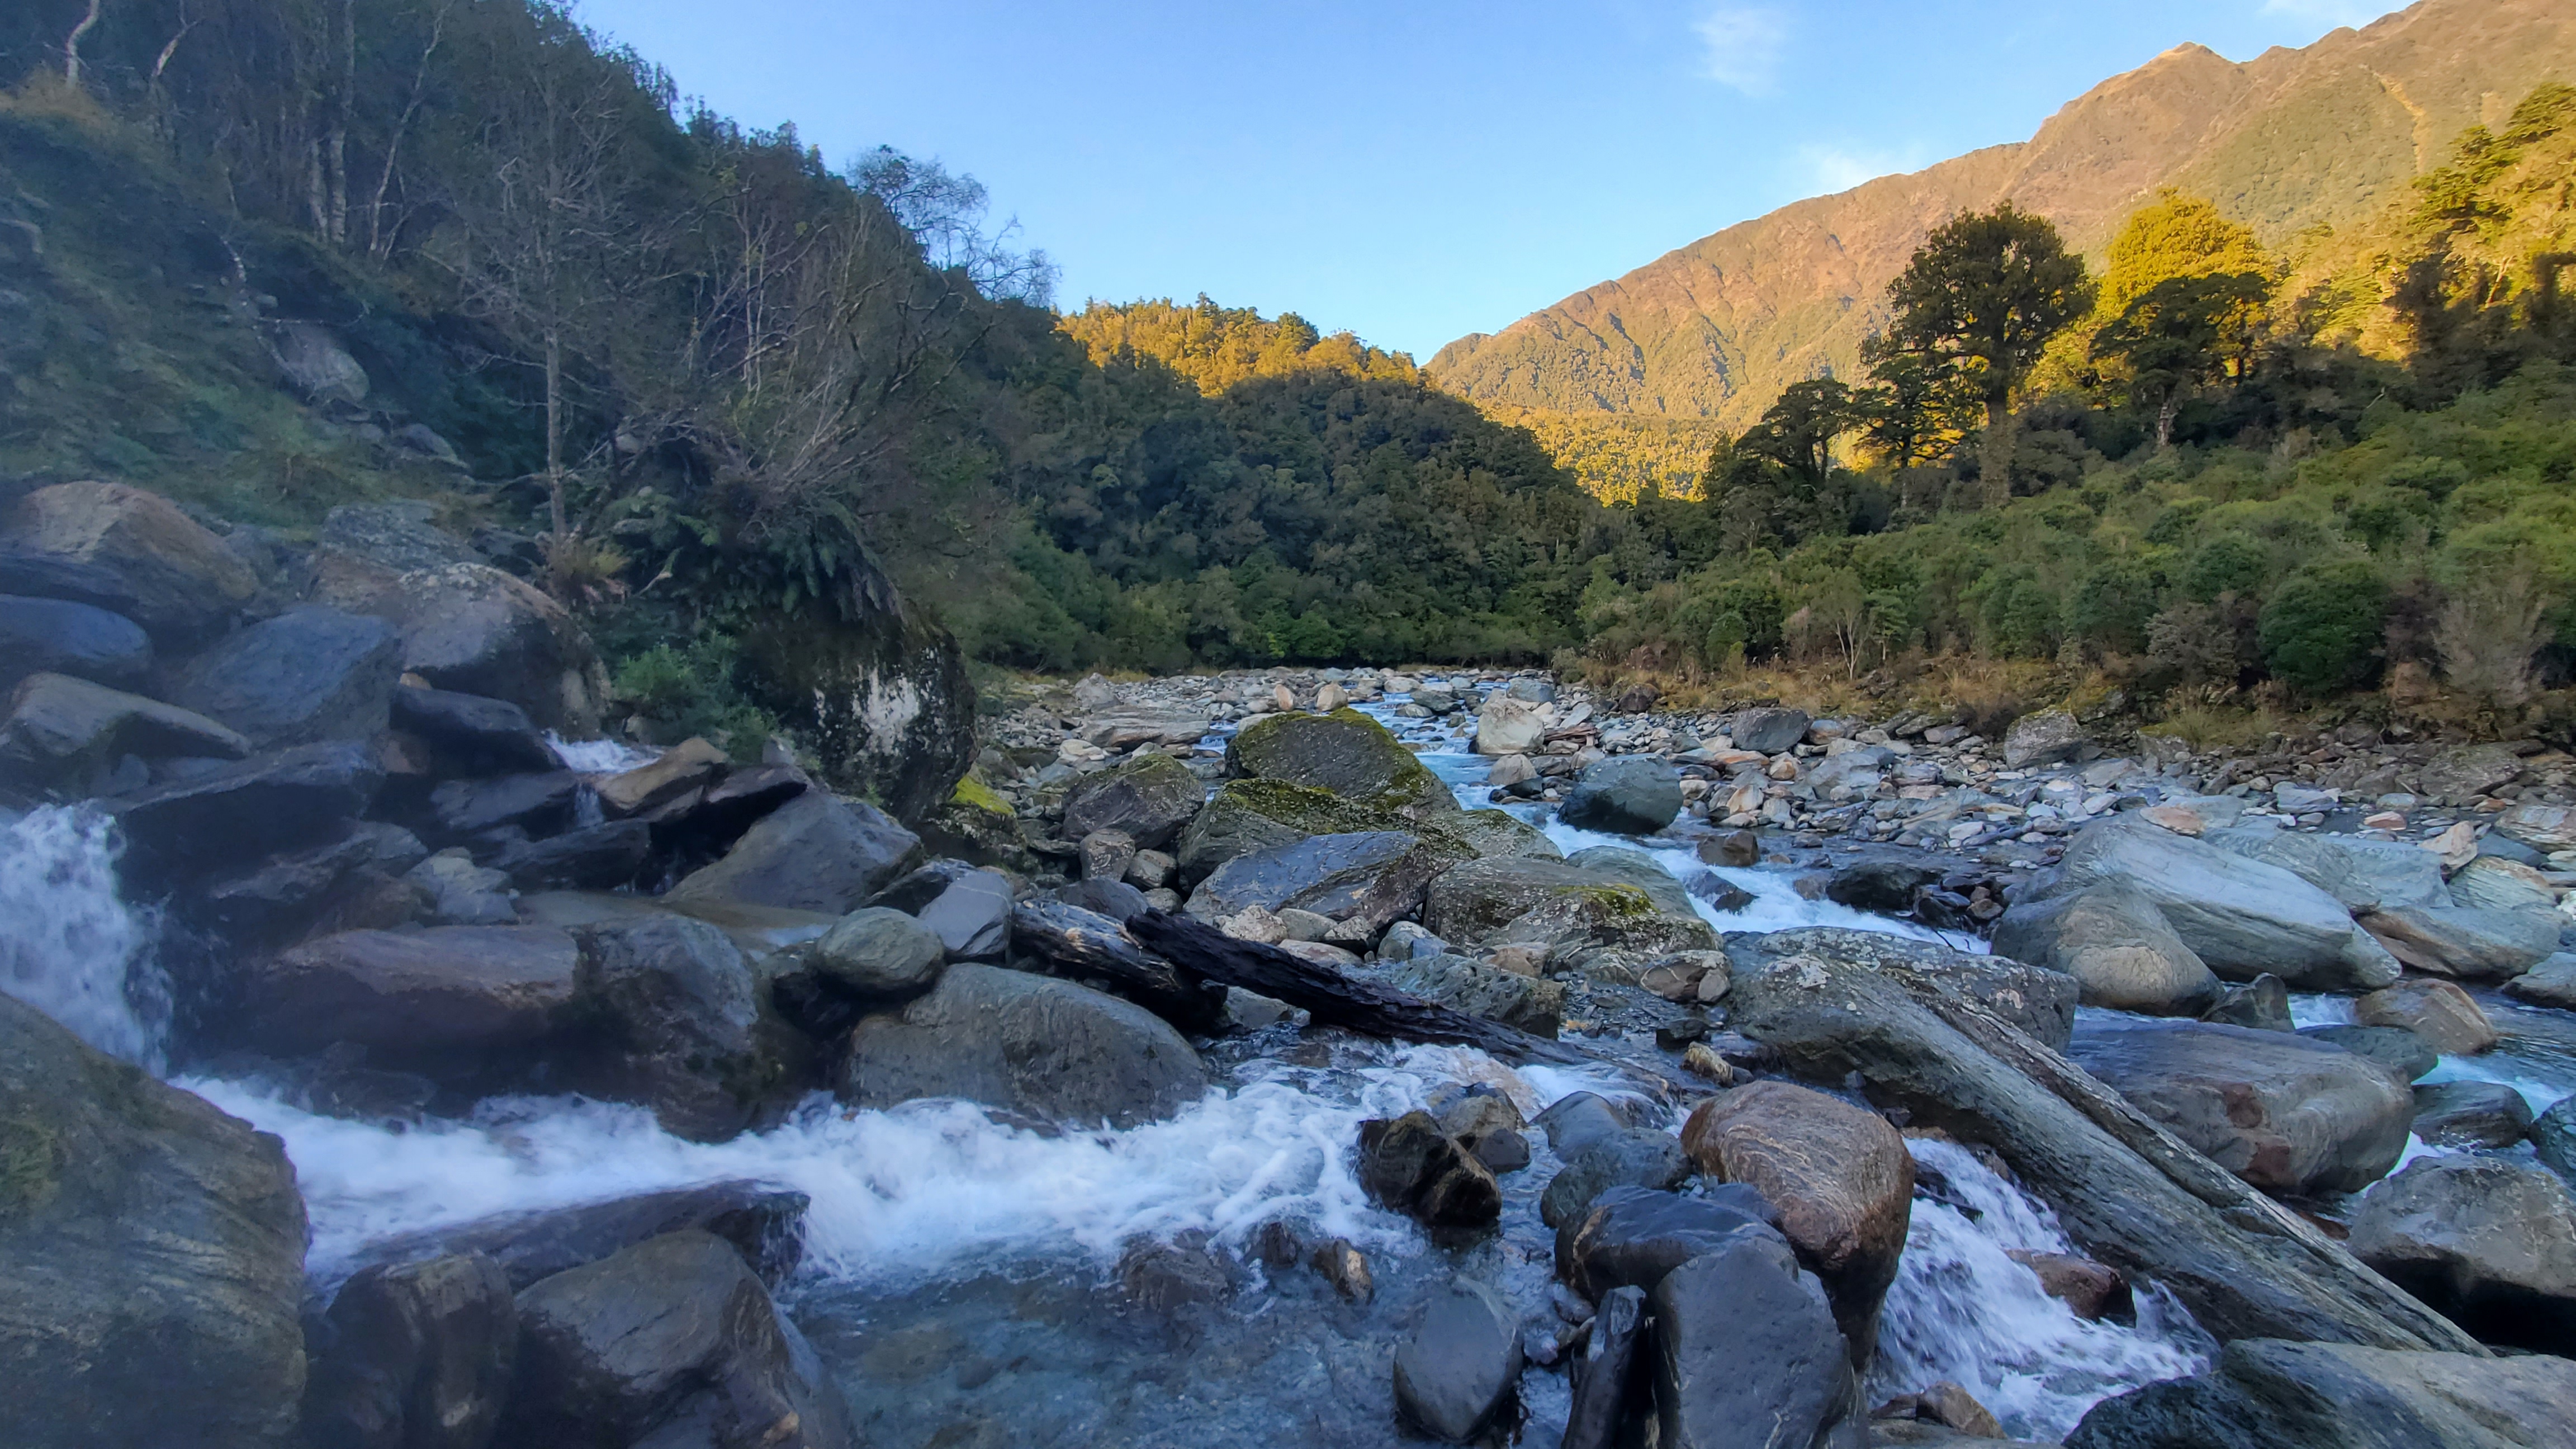 Crossing the side stream above the boulders along the Toaroha River